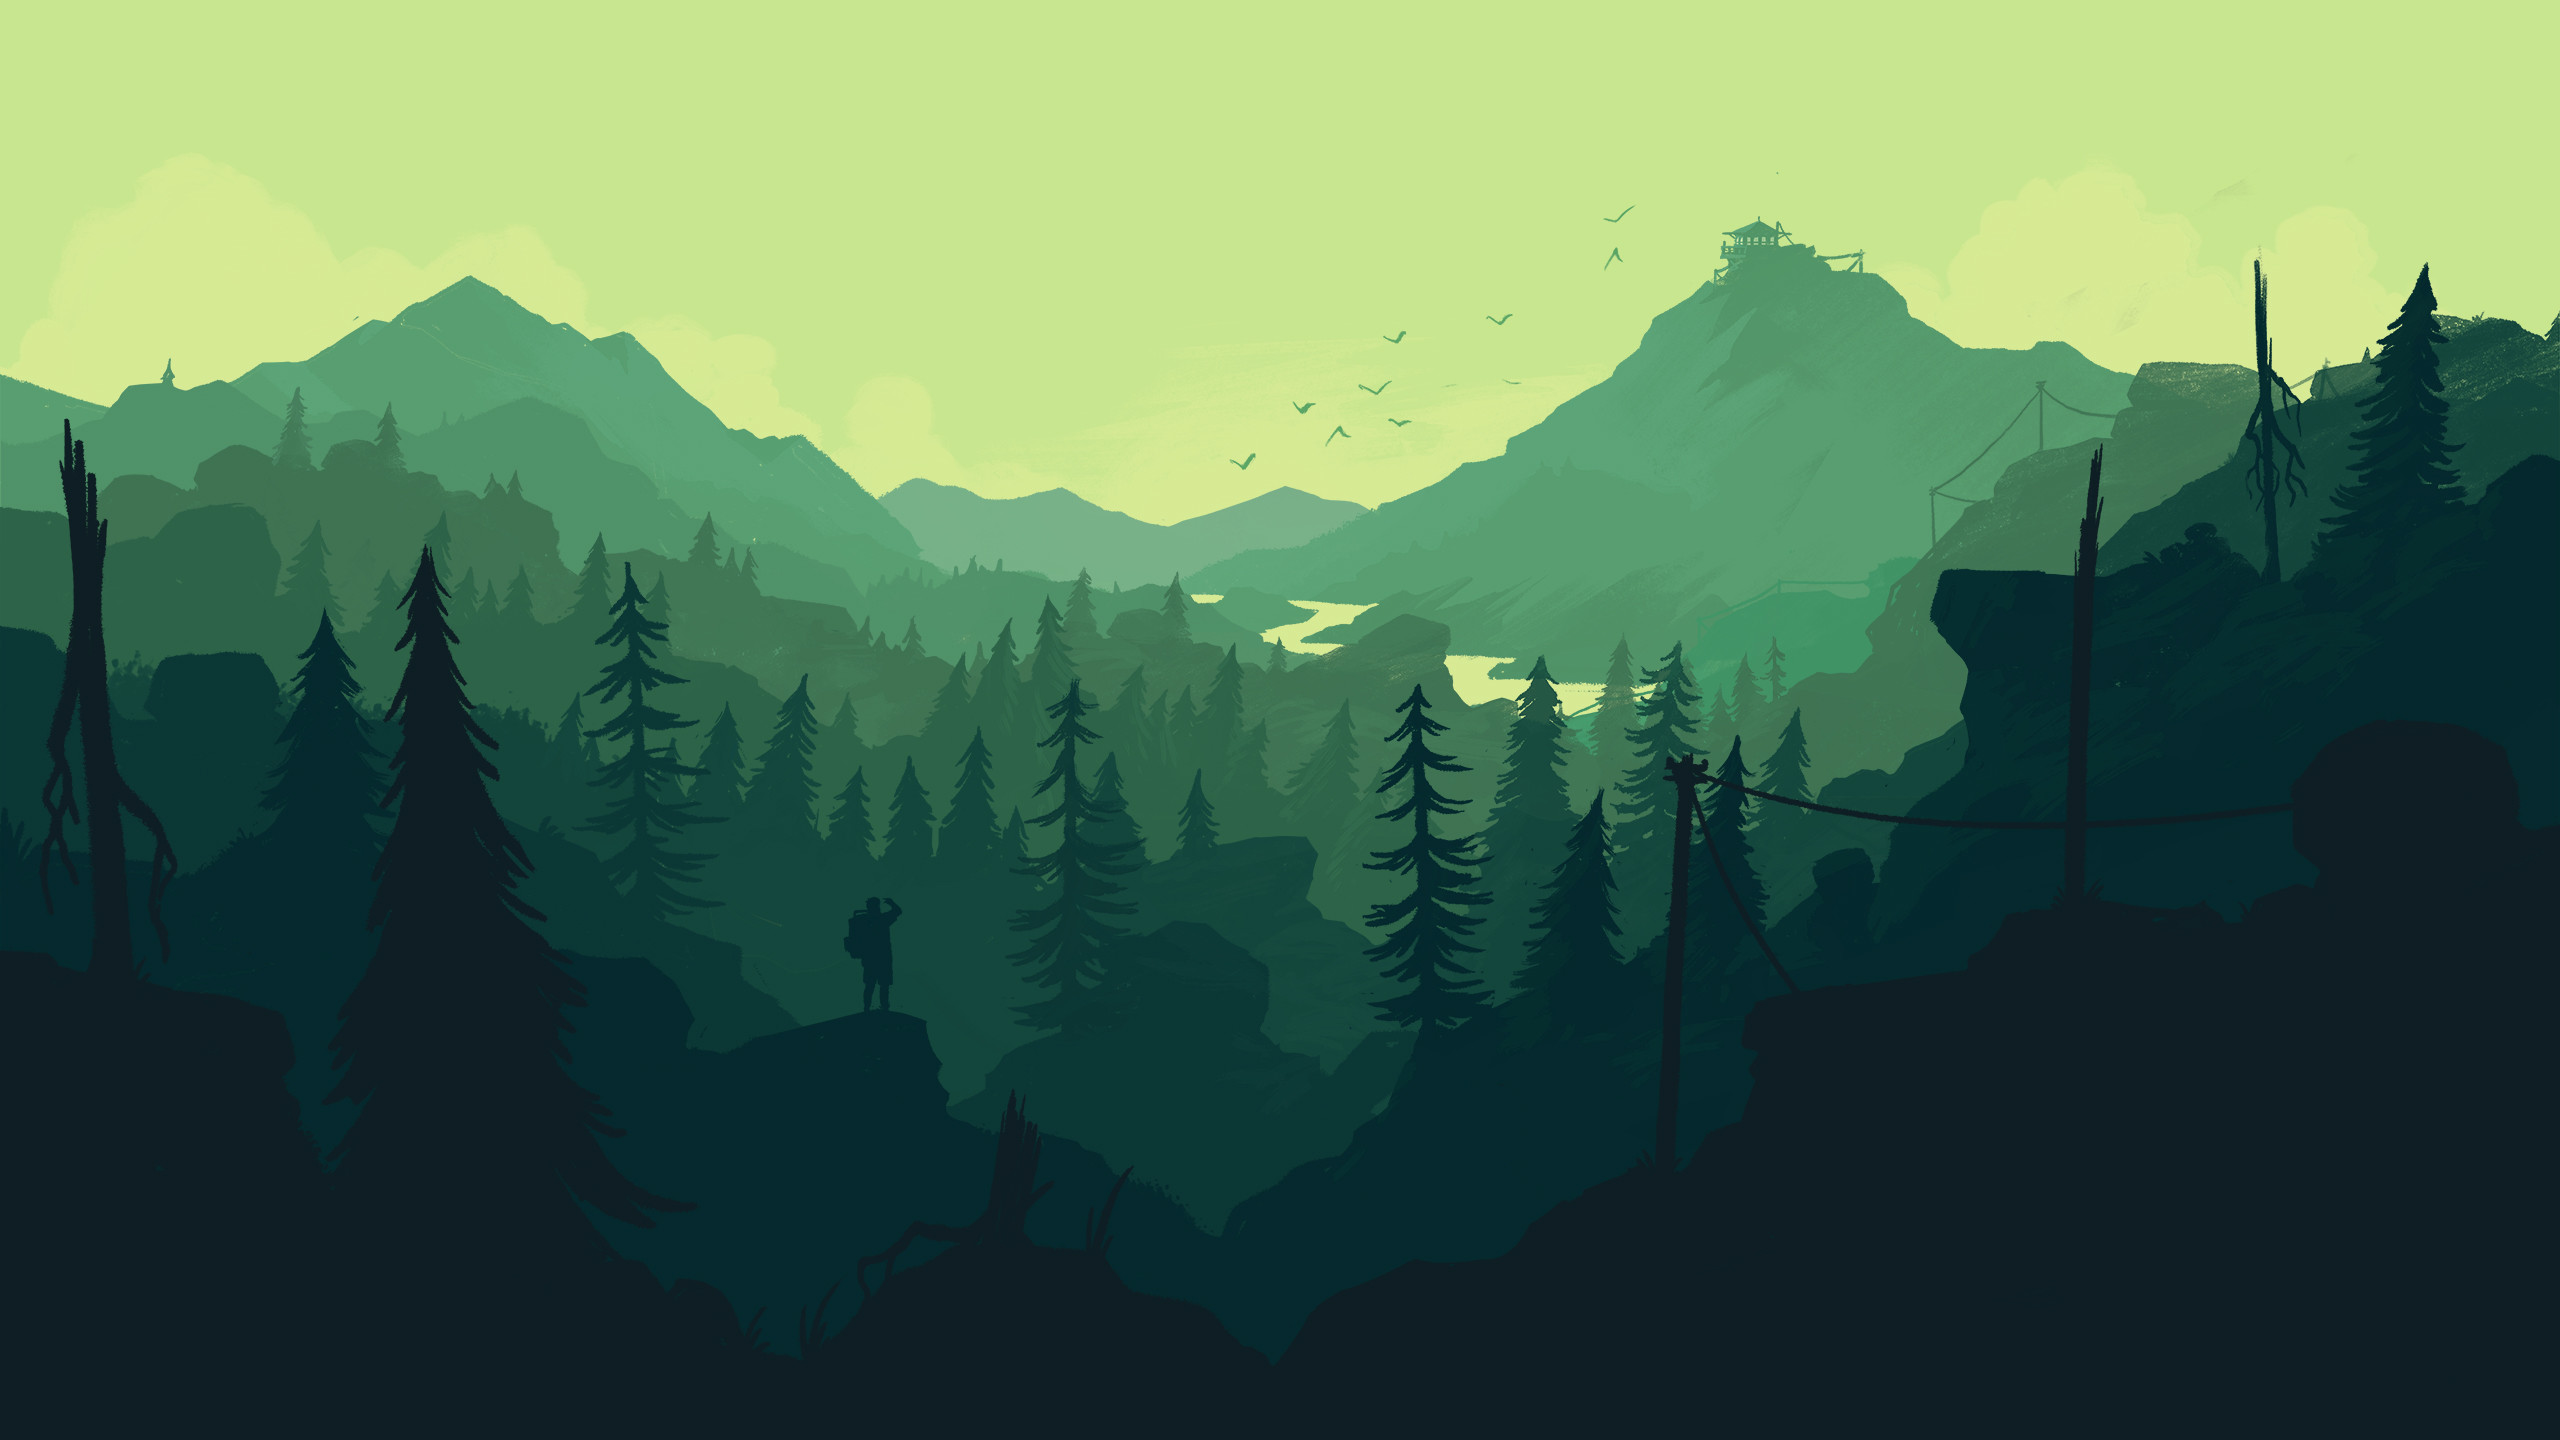 2560x1440 Firewatch videogame wallpaper. Colorful landscape wallpaper, mountains,  forest, trees, nature.